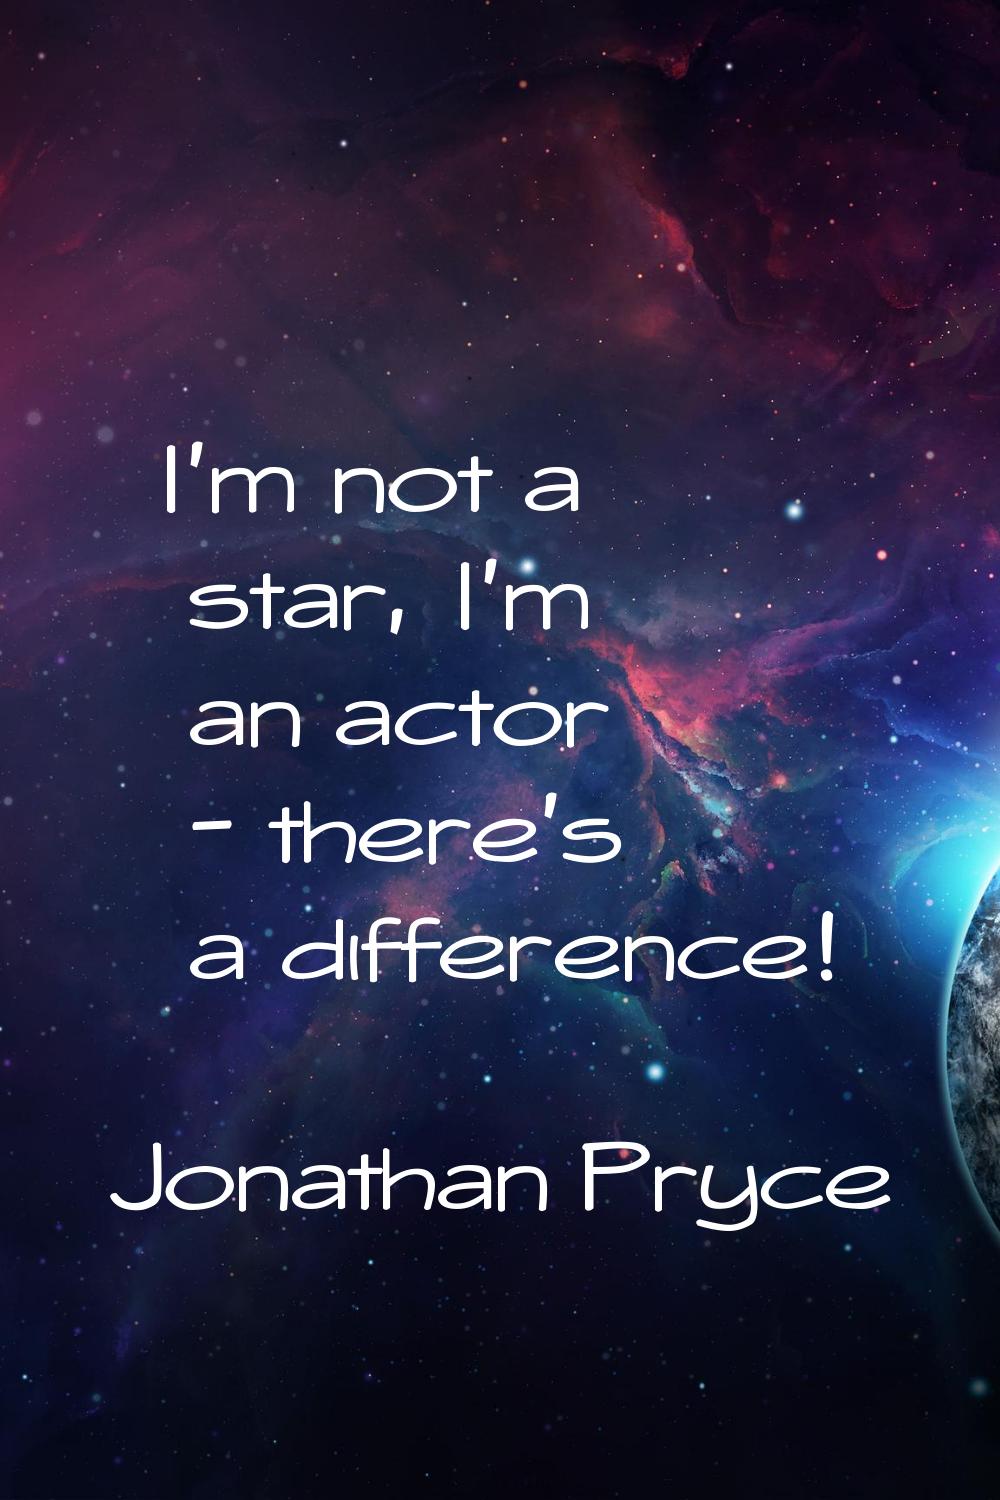 I'm not a star, I'm an actor - there's a difference!